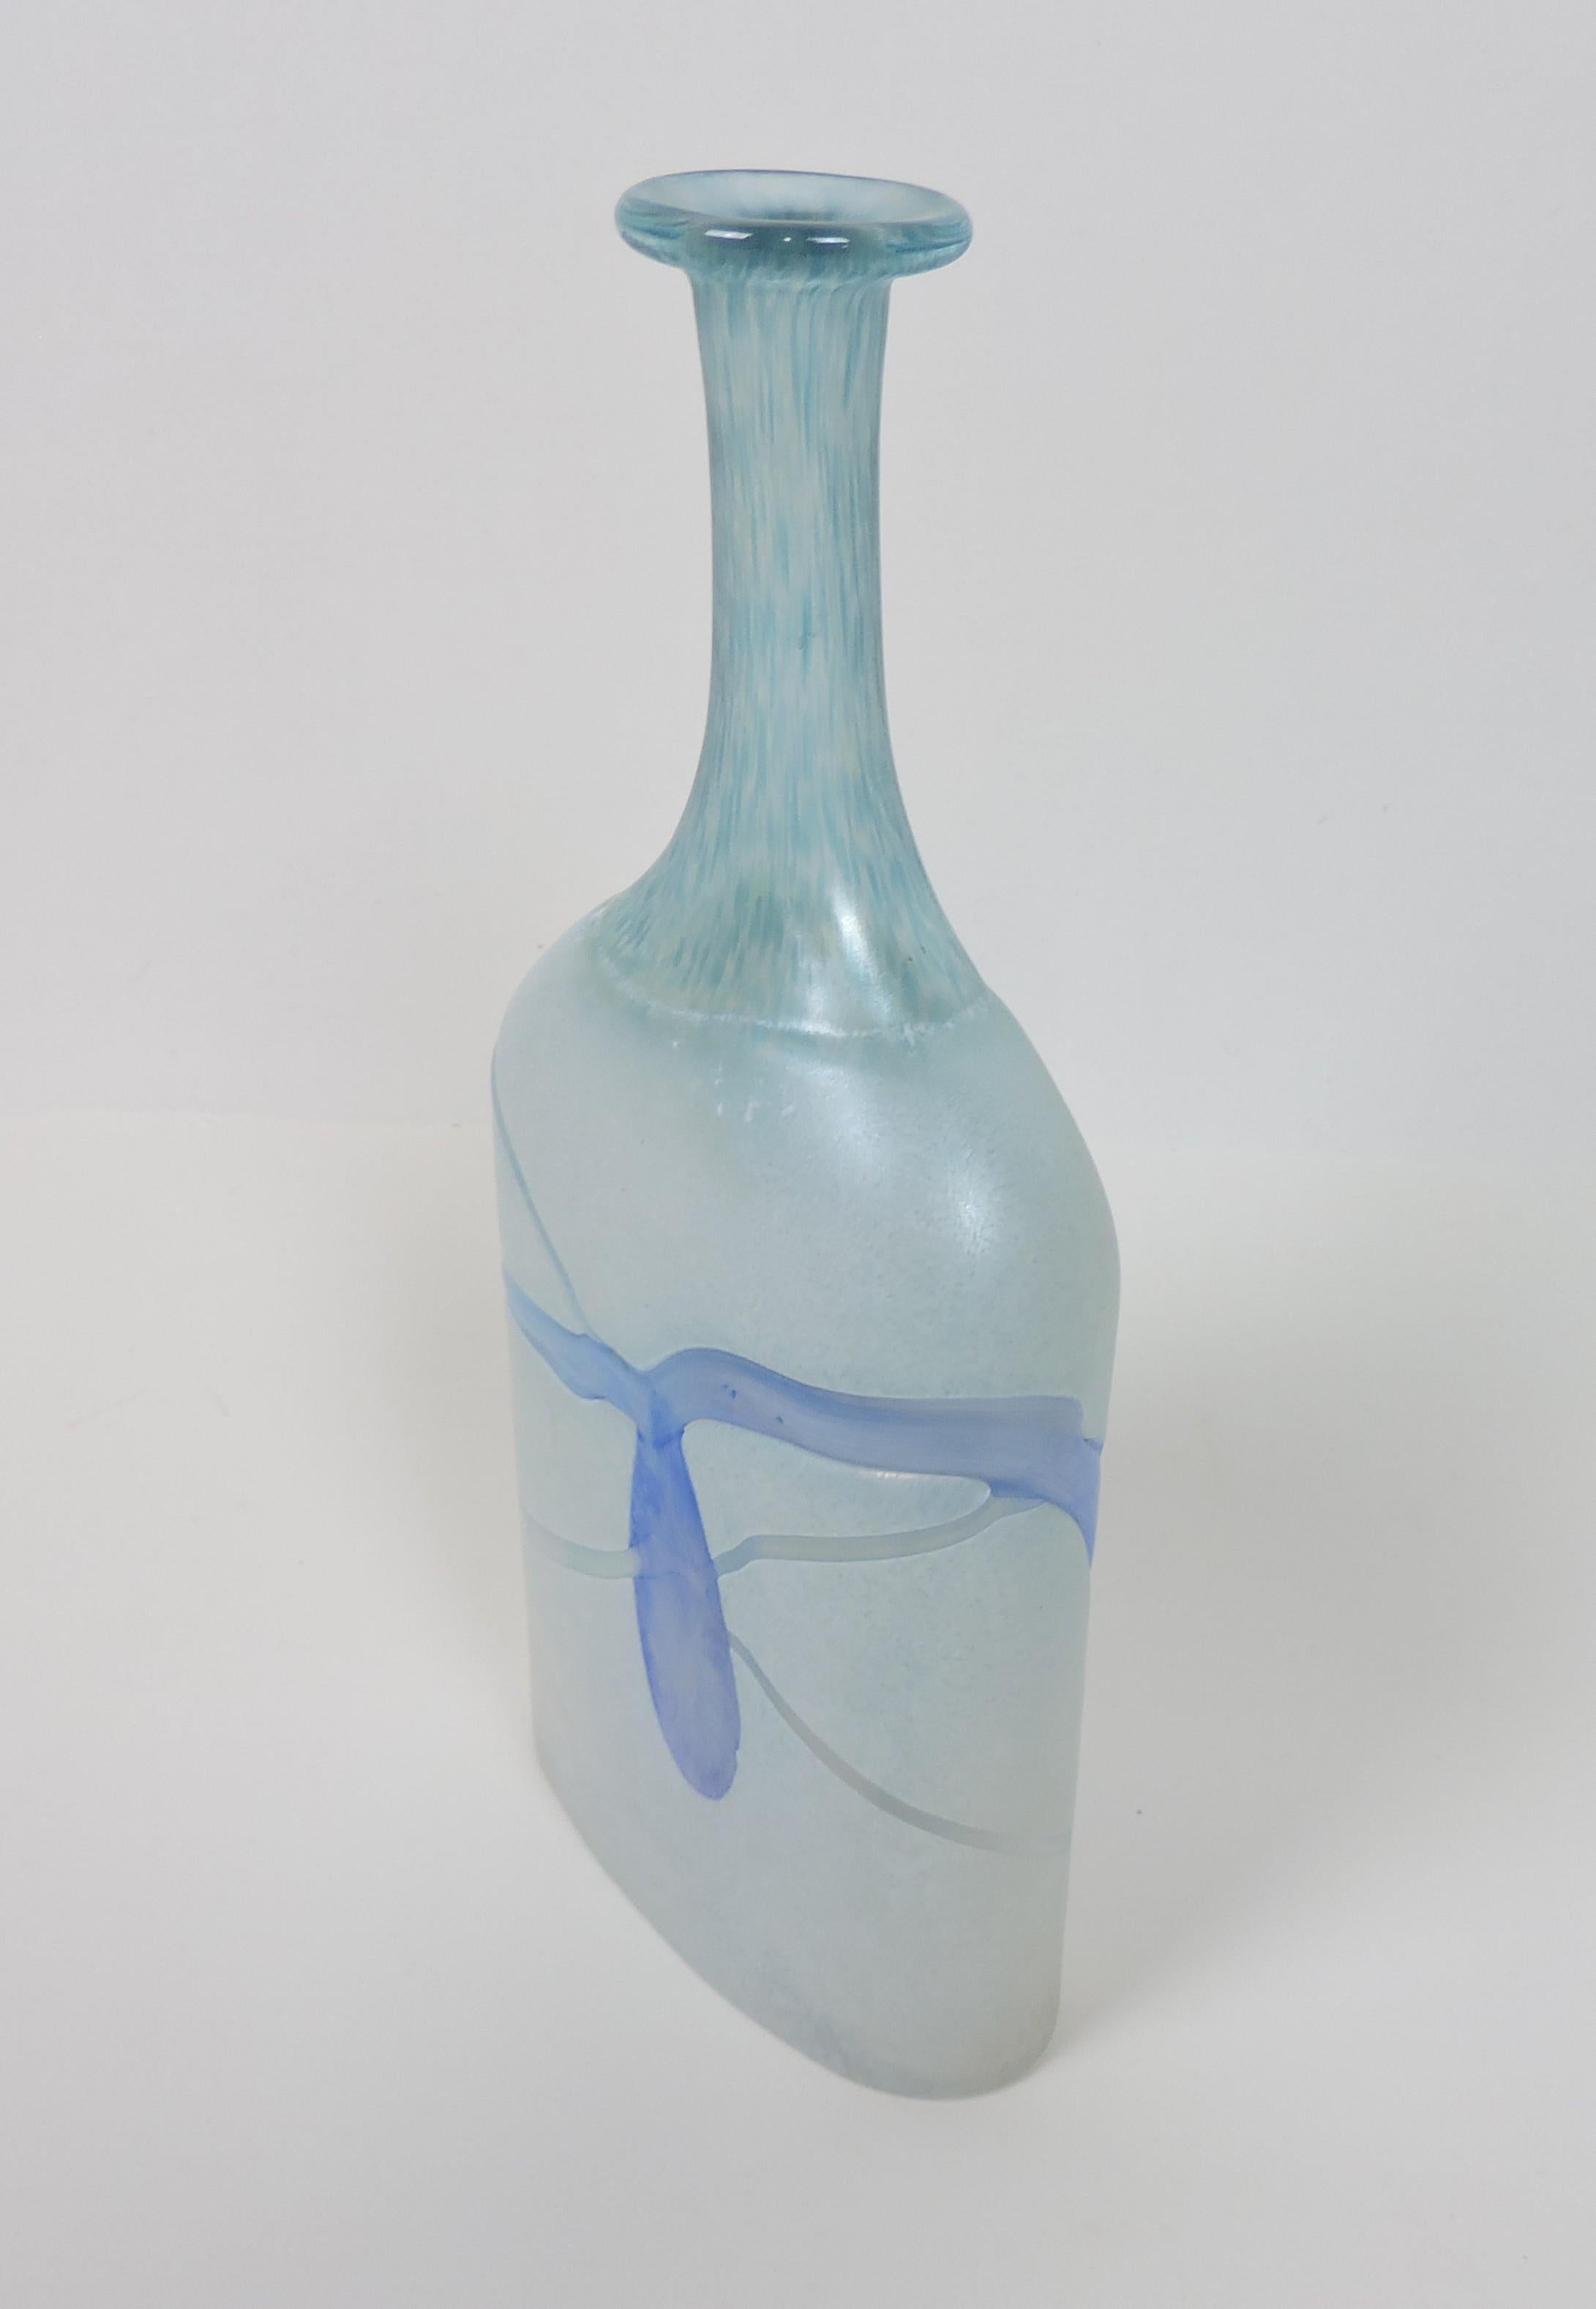 Beautiful glass vase designed by Bertil Vallien and manufactured by Kosta Boda of Sweden. This is part of the Galaxy Blue series from the 1980s, and is handblown with applied glass accents that are in an abstract, modern design. Signed on bottom,